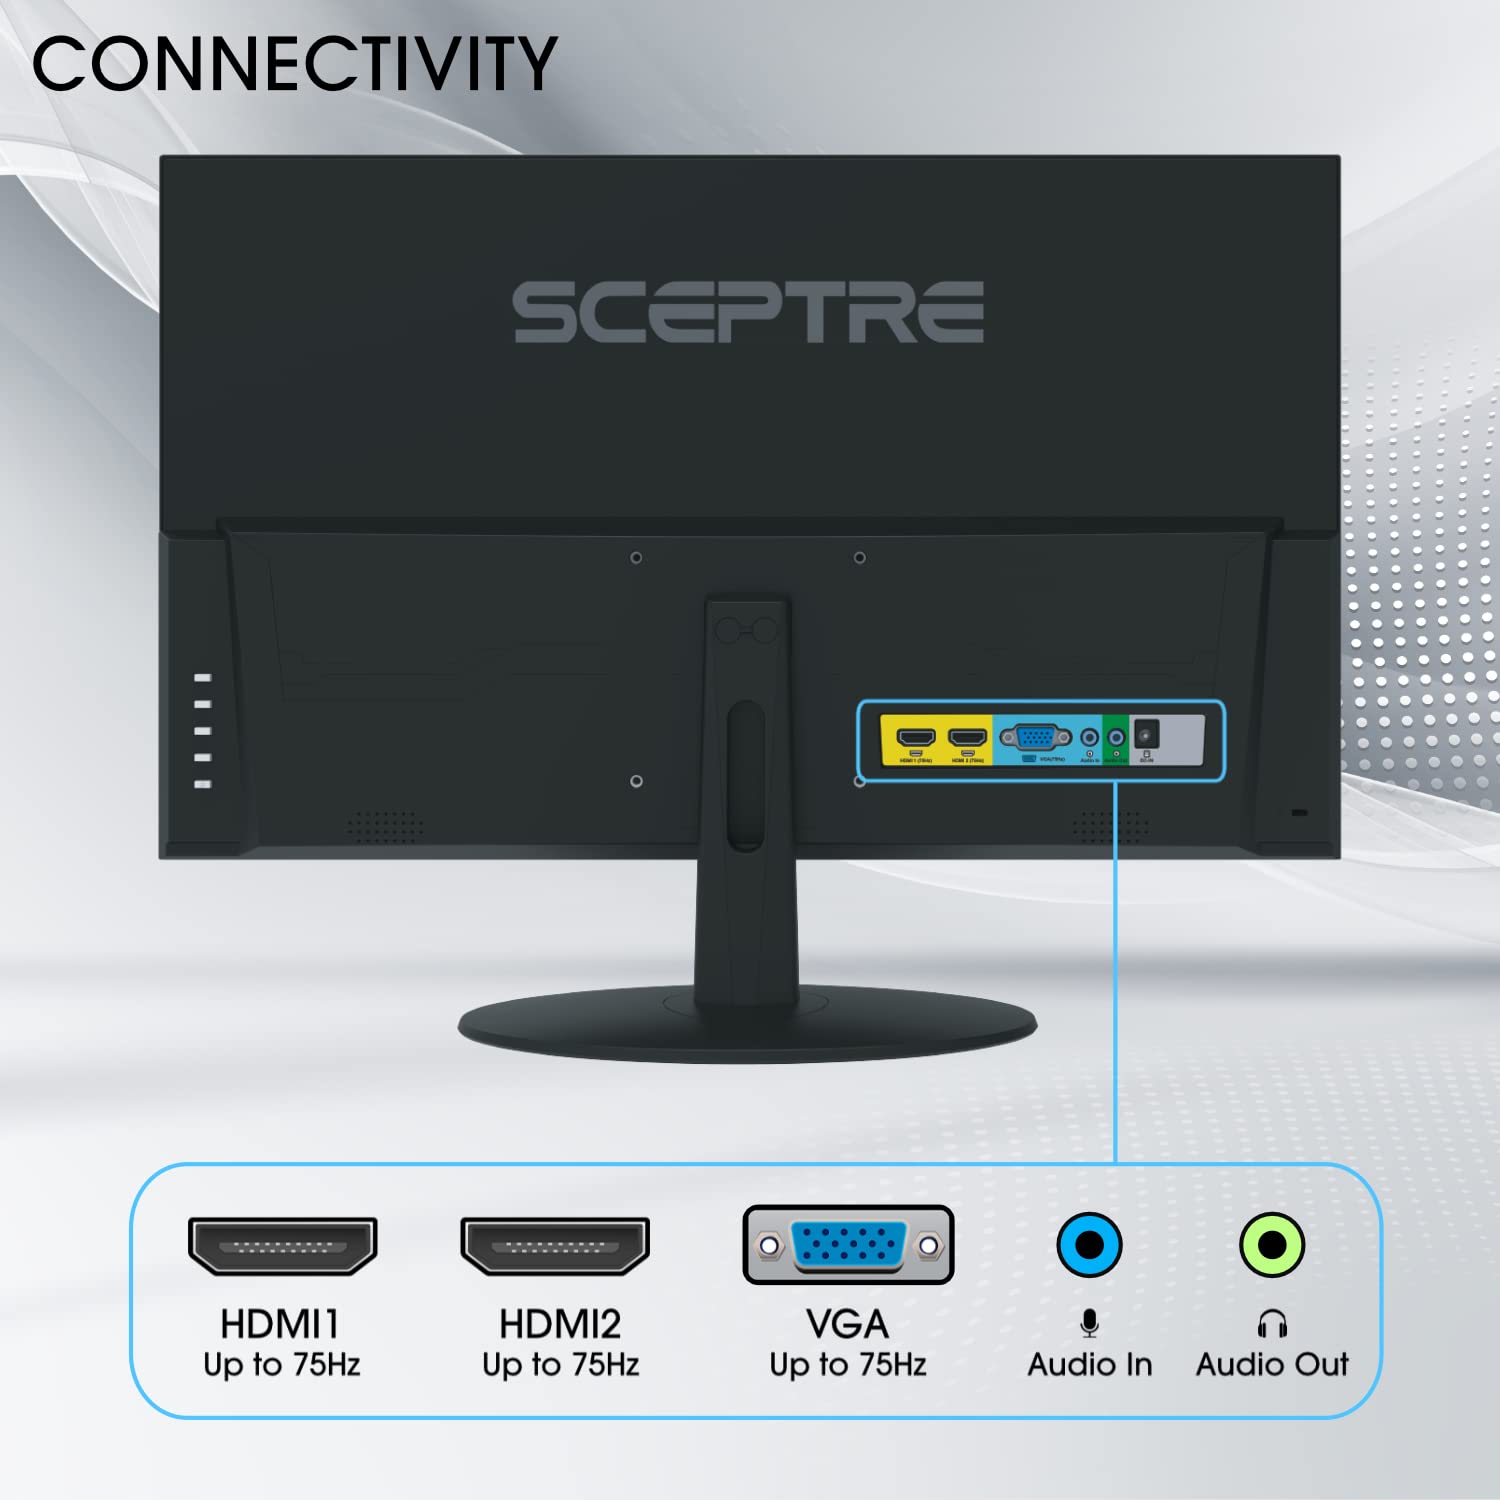 Sceptre IPS 27-Inch Business Computer Monitor 1080p 75Hz with HDMI VGA Build-in Speakers, Machine Black 2020 (E275W-FPT), 27